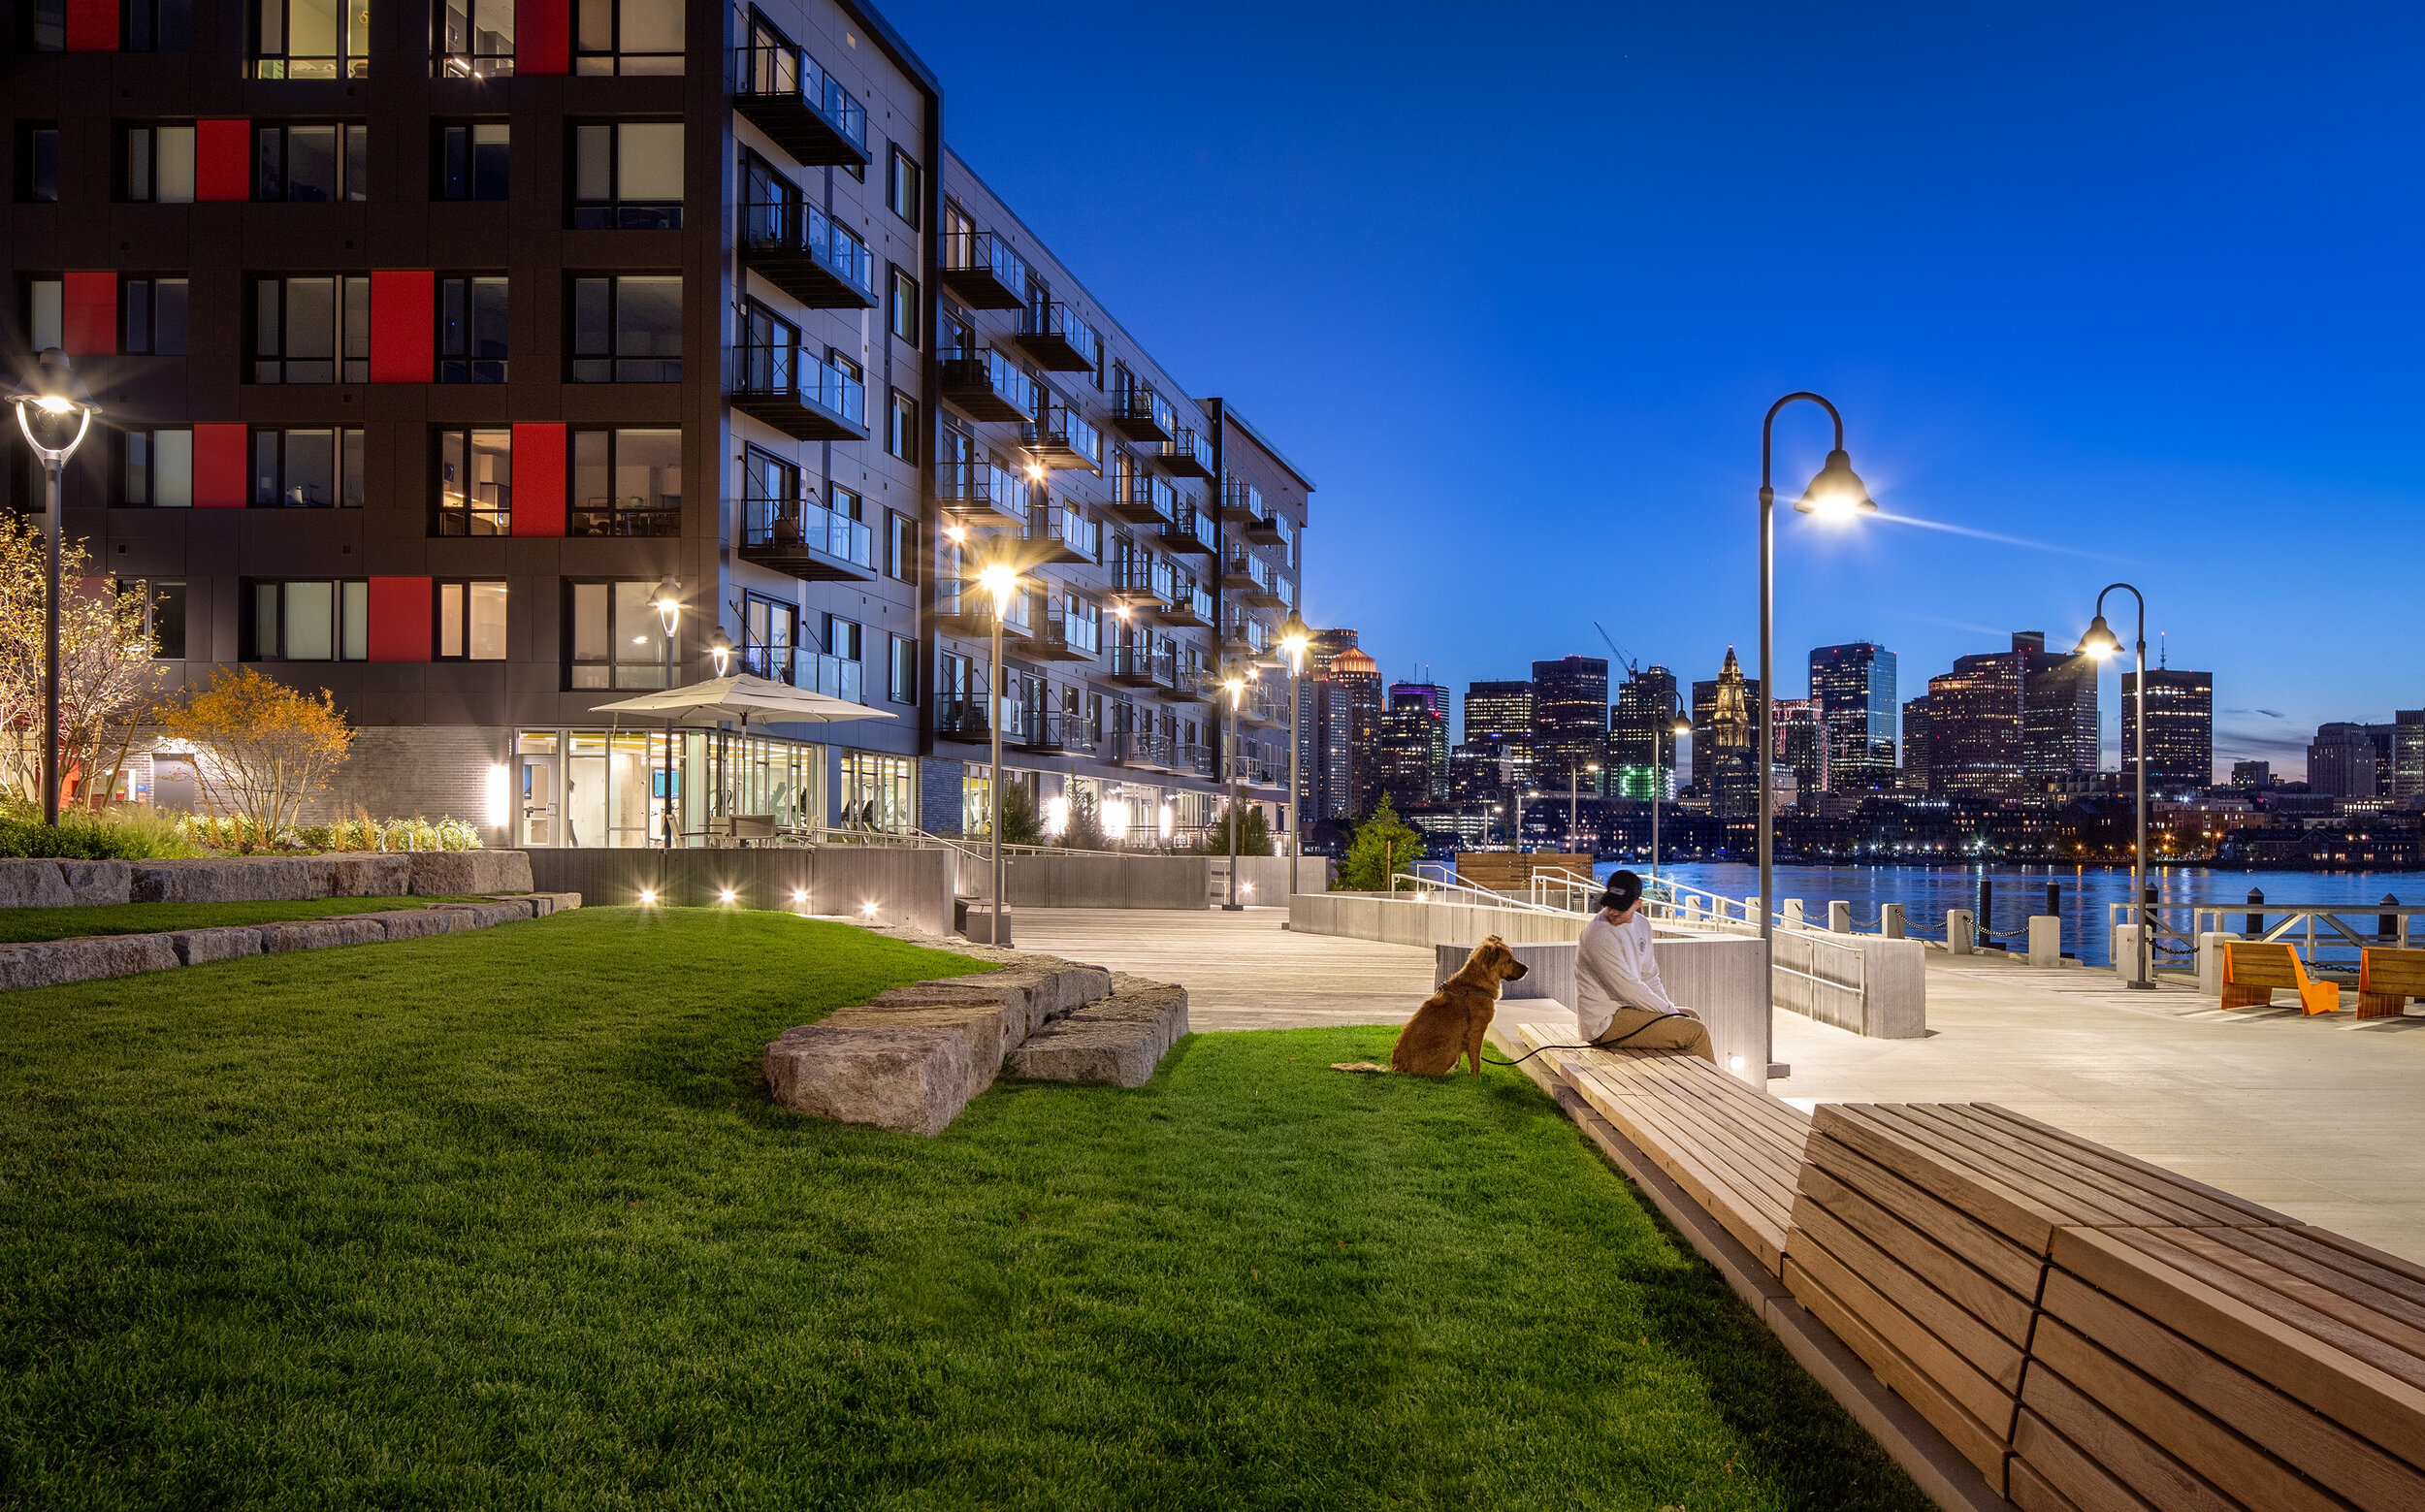  Outdoor seating at Clippership Wharf (Photo by Ed Wonsek) 